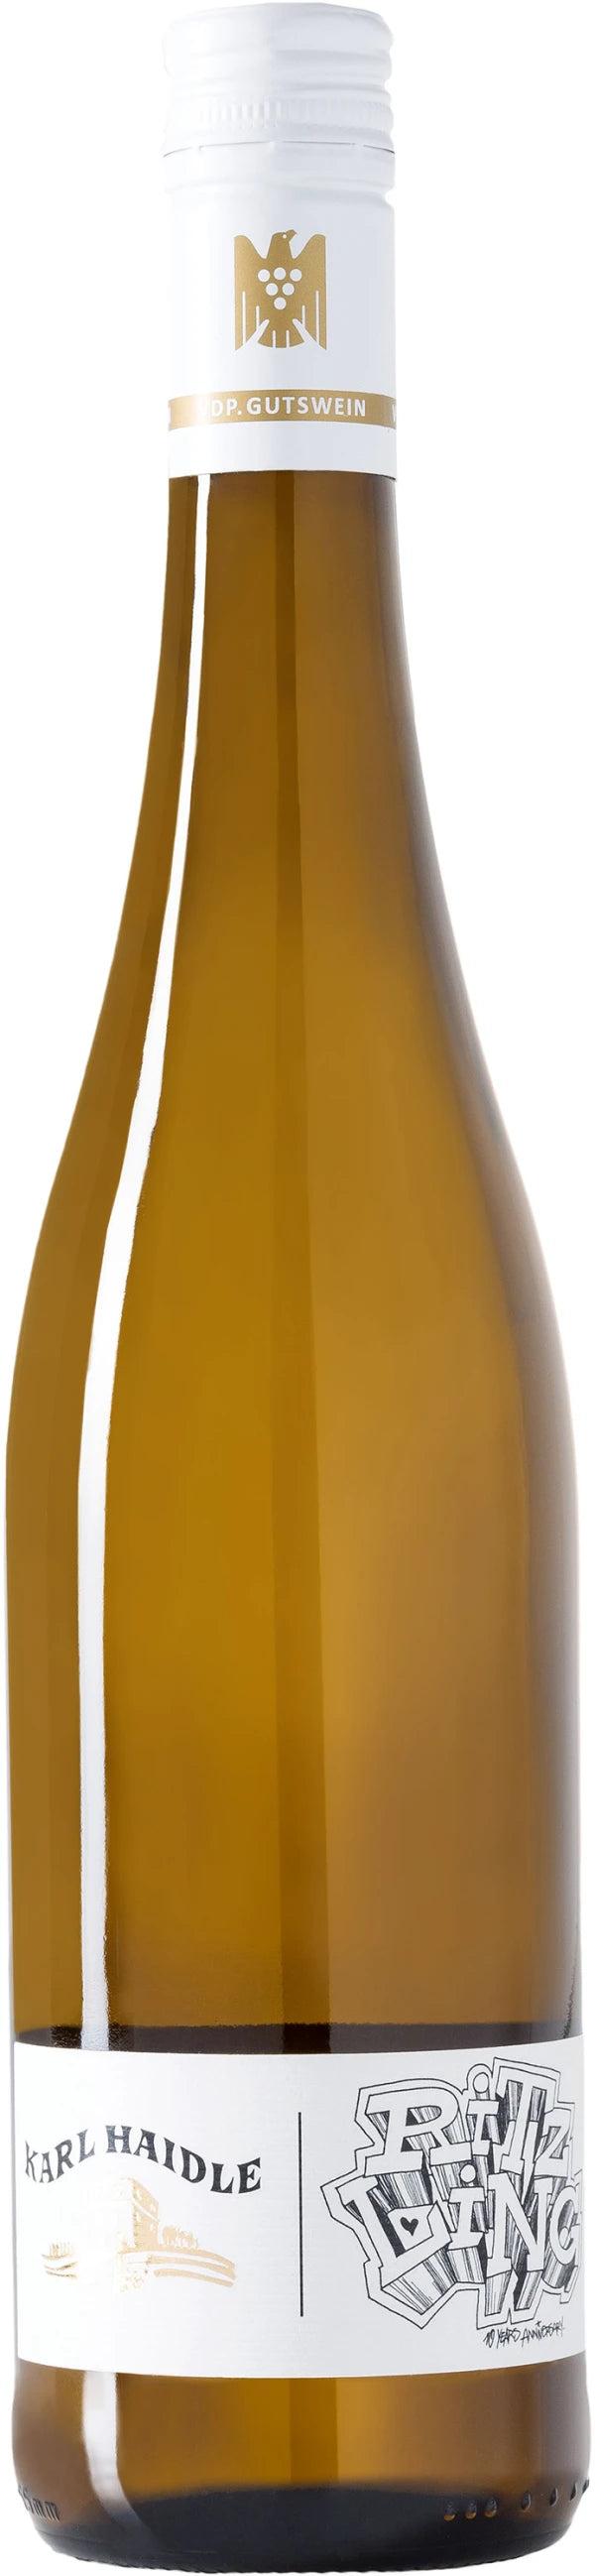 A wine product picture of Karl Haidle Ritzling Riesling Trocken}